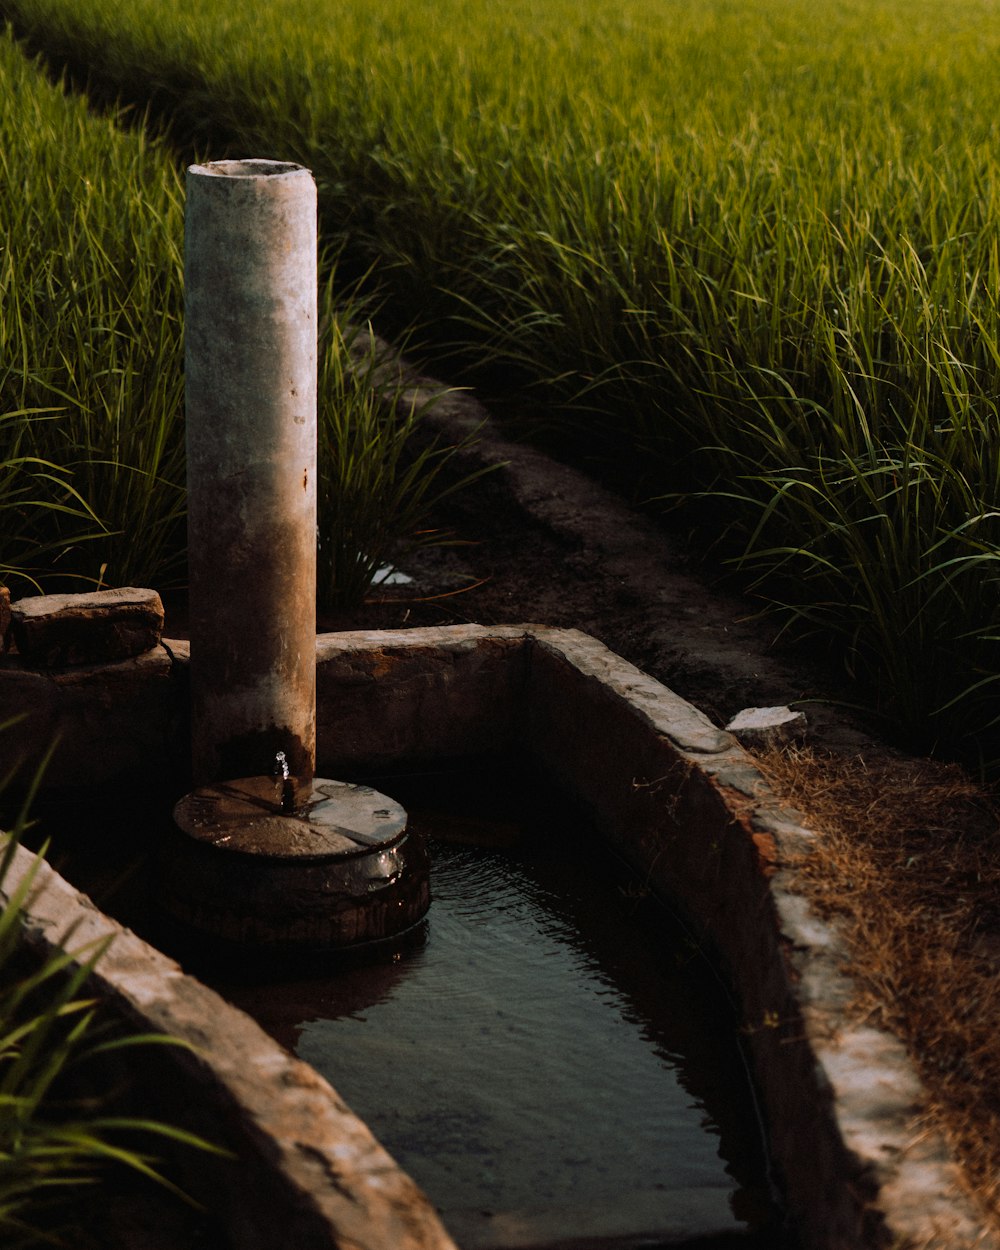 a well in the middle of a grassy field